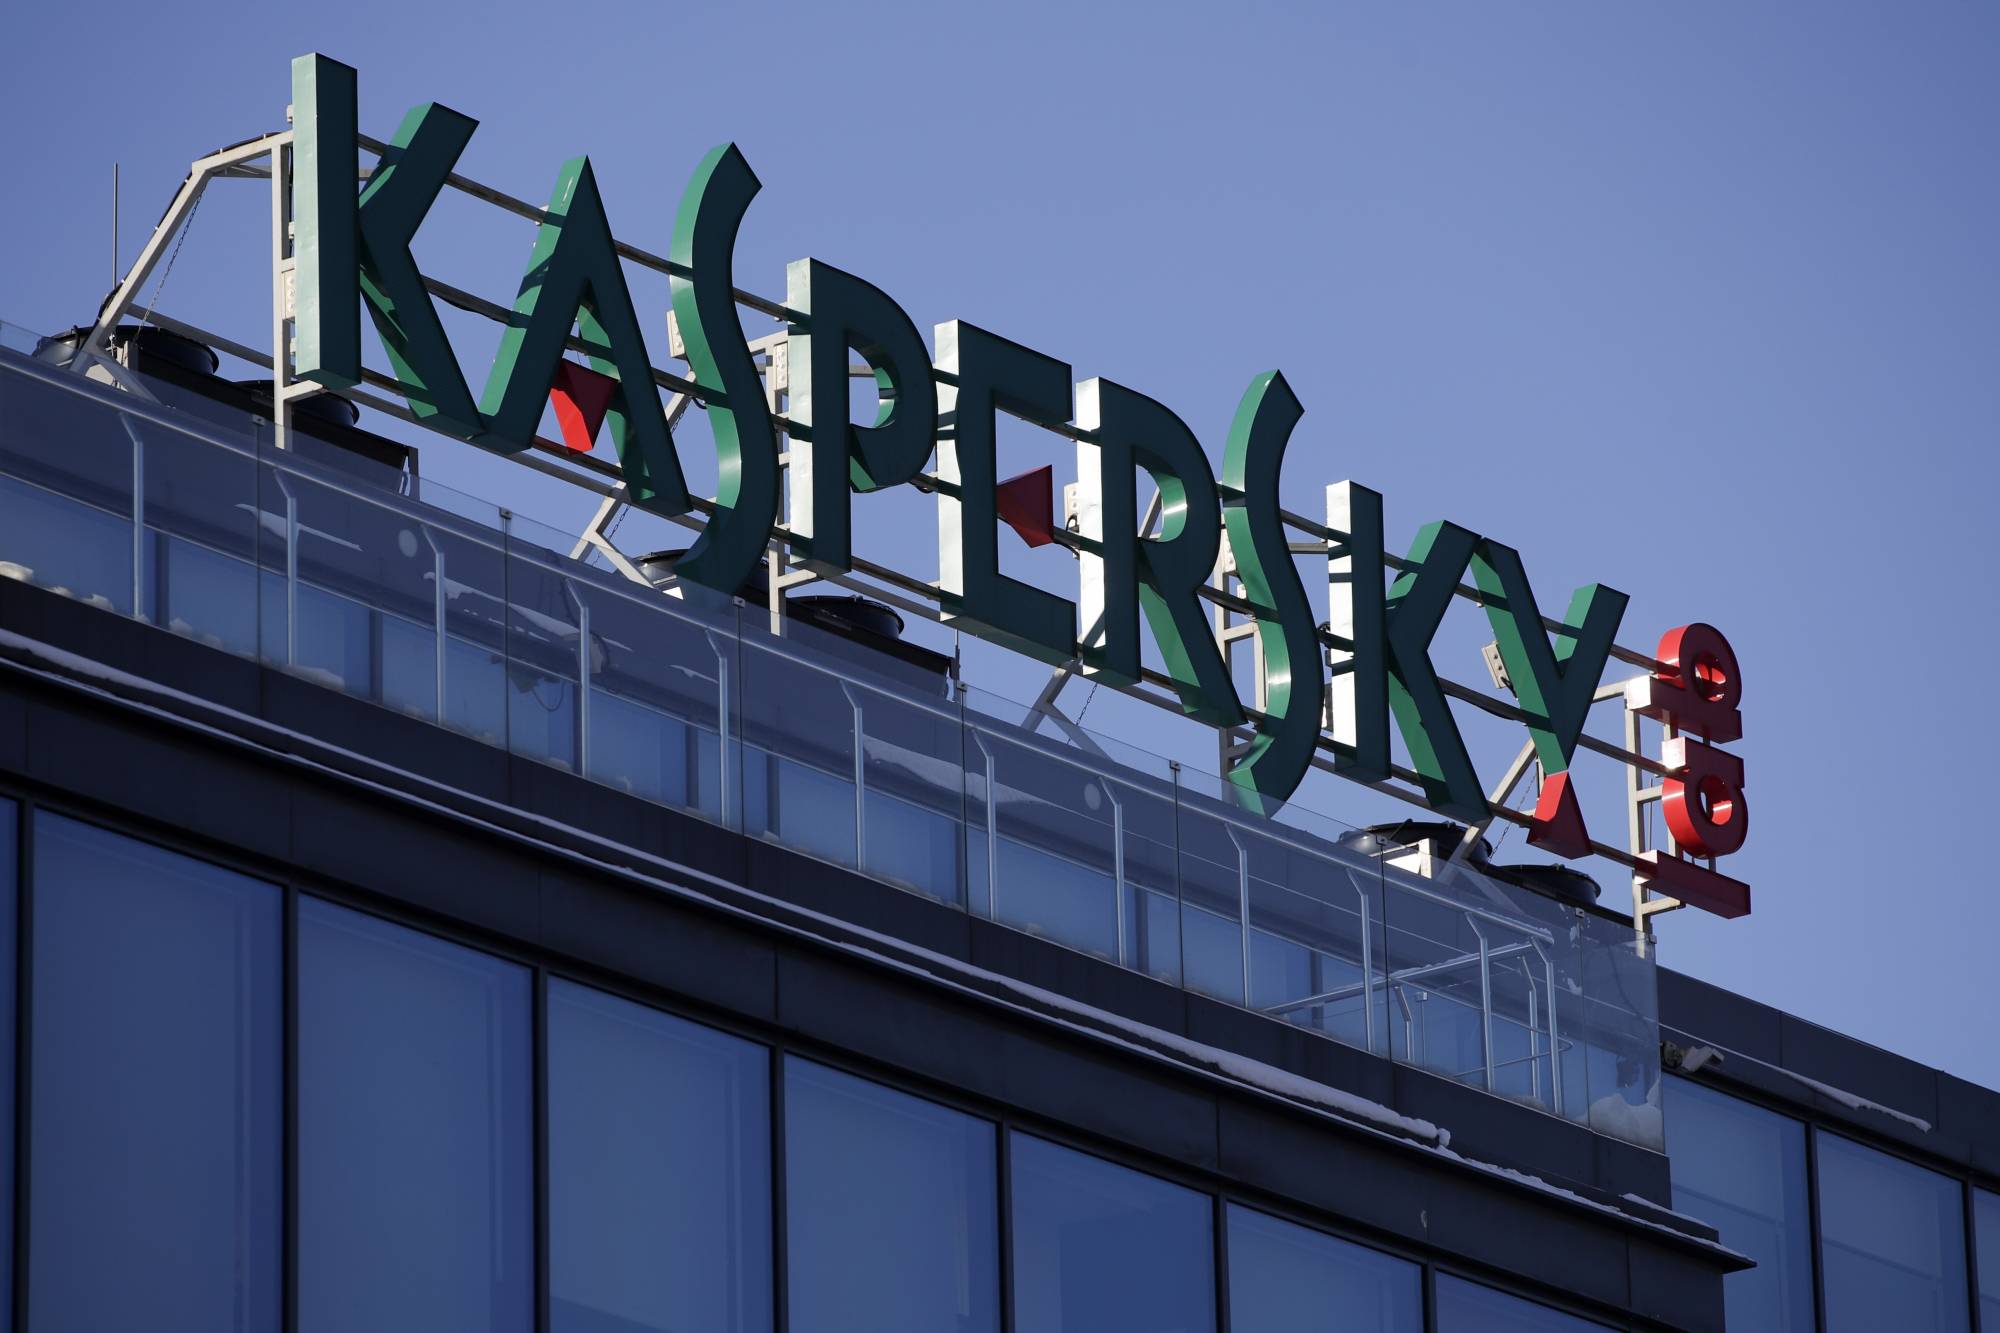 FILE - This Monday, Jan. 30, 2017, file photo shows a sign above the headquarters of Kaspersky Lab in Moscow. Britain's cybersecurity agency has told government departments not to use antivirus software from Moscow-based firm Kaspersky Lab, it was reported Saturday, Dec. 2, 2017. (AP Photo/Pavel Golovkin, File)